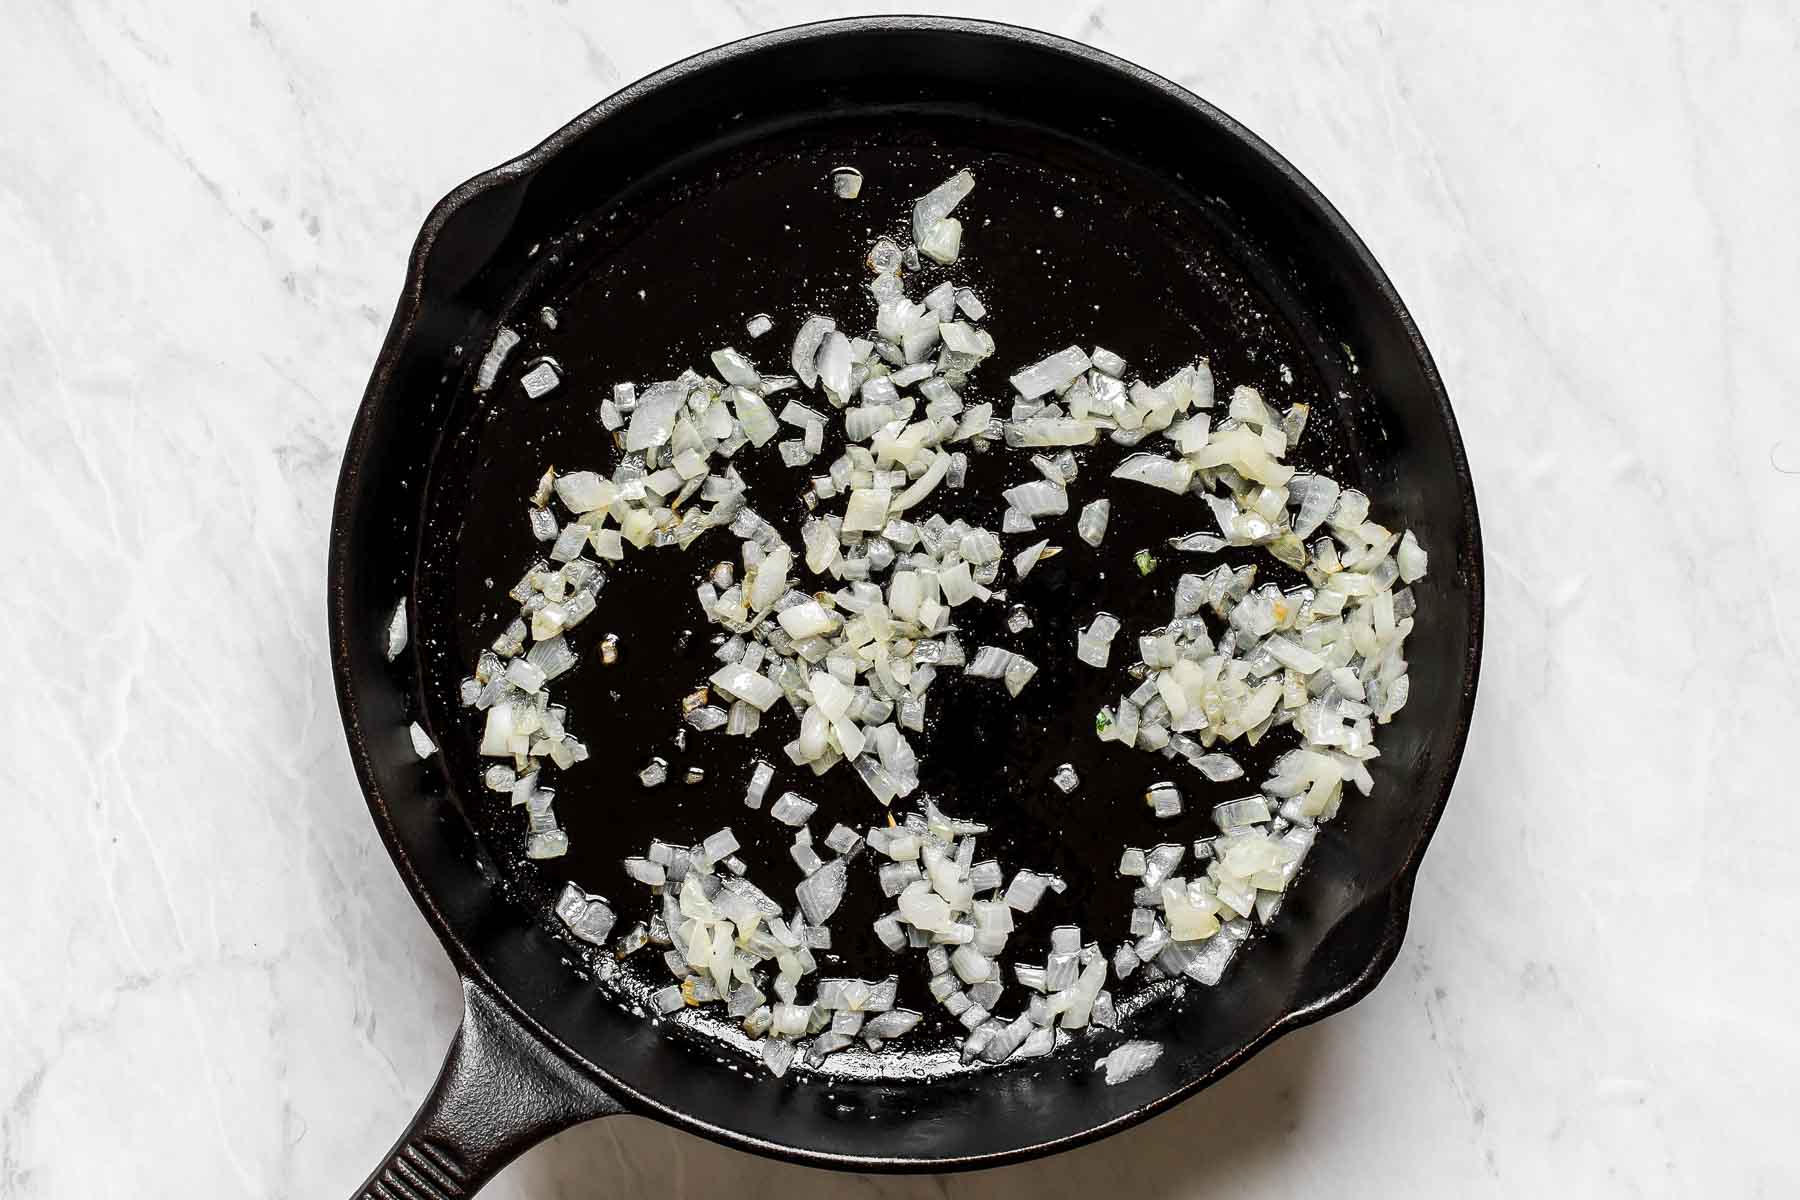 Onions sautéing in oil in a cast iron skillet.